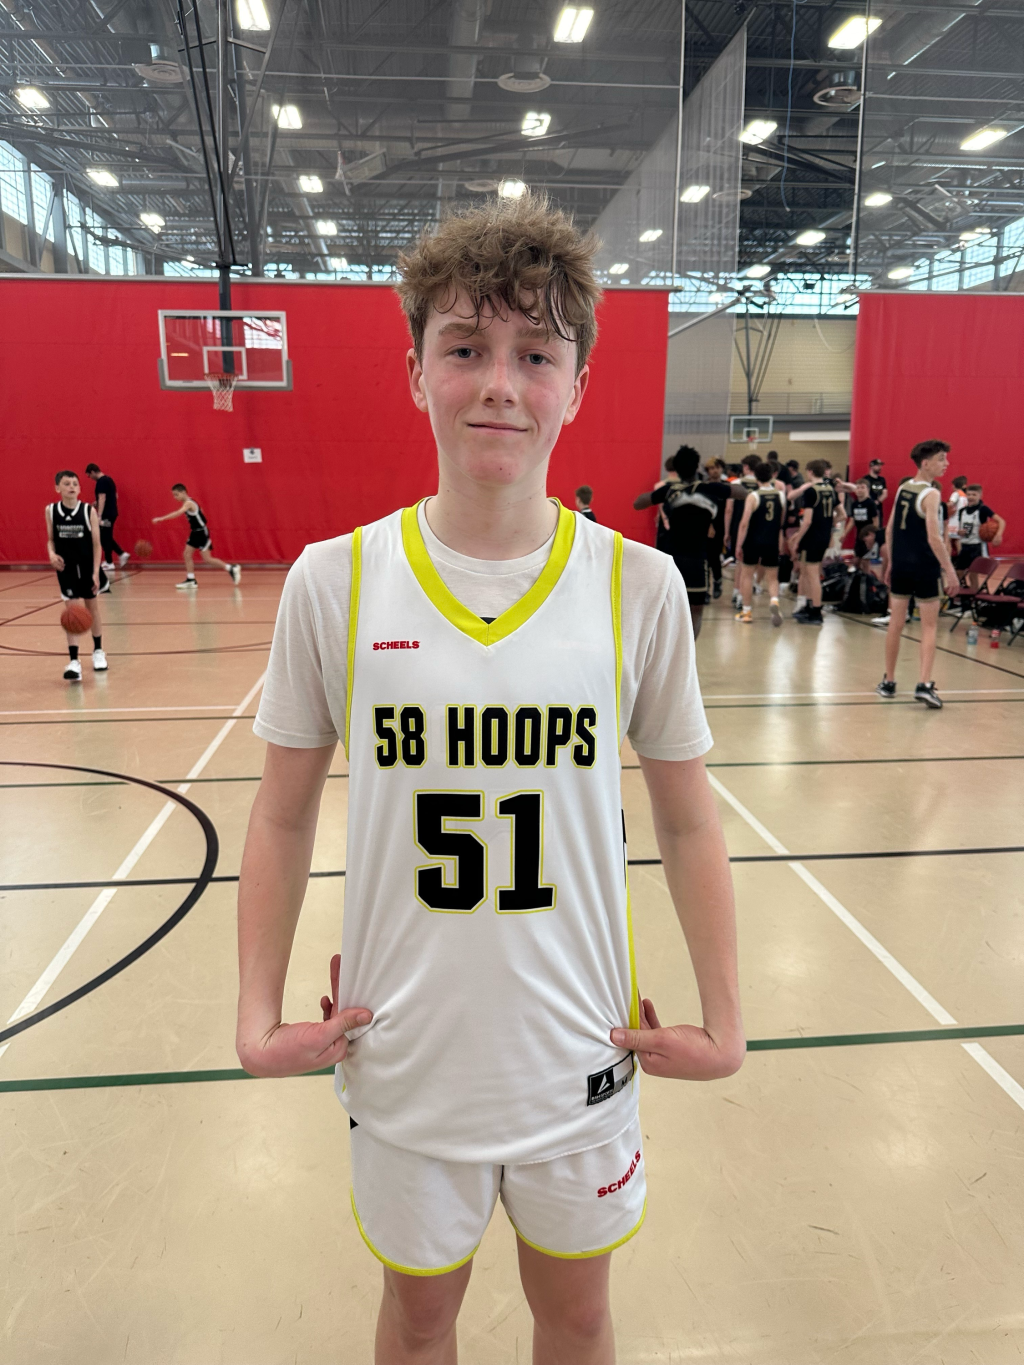 Next NHR State Tournament &#8211; Additional Prospects of Note